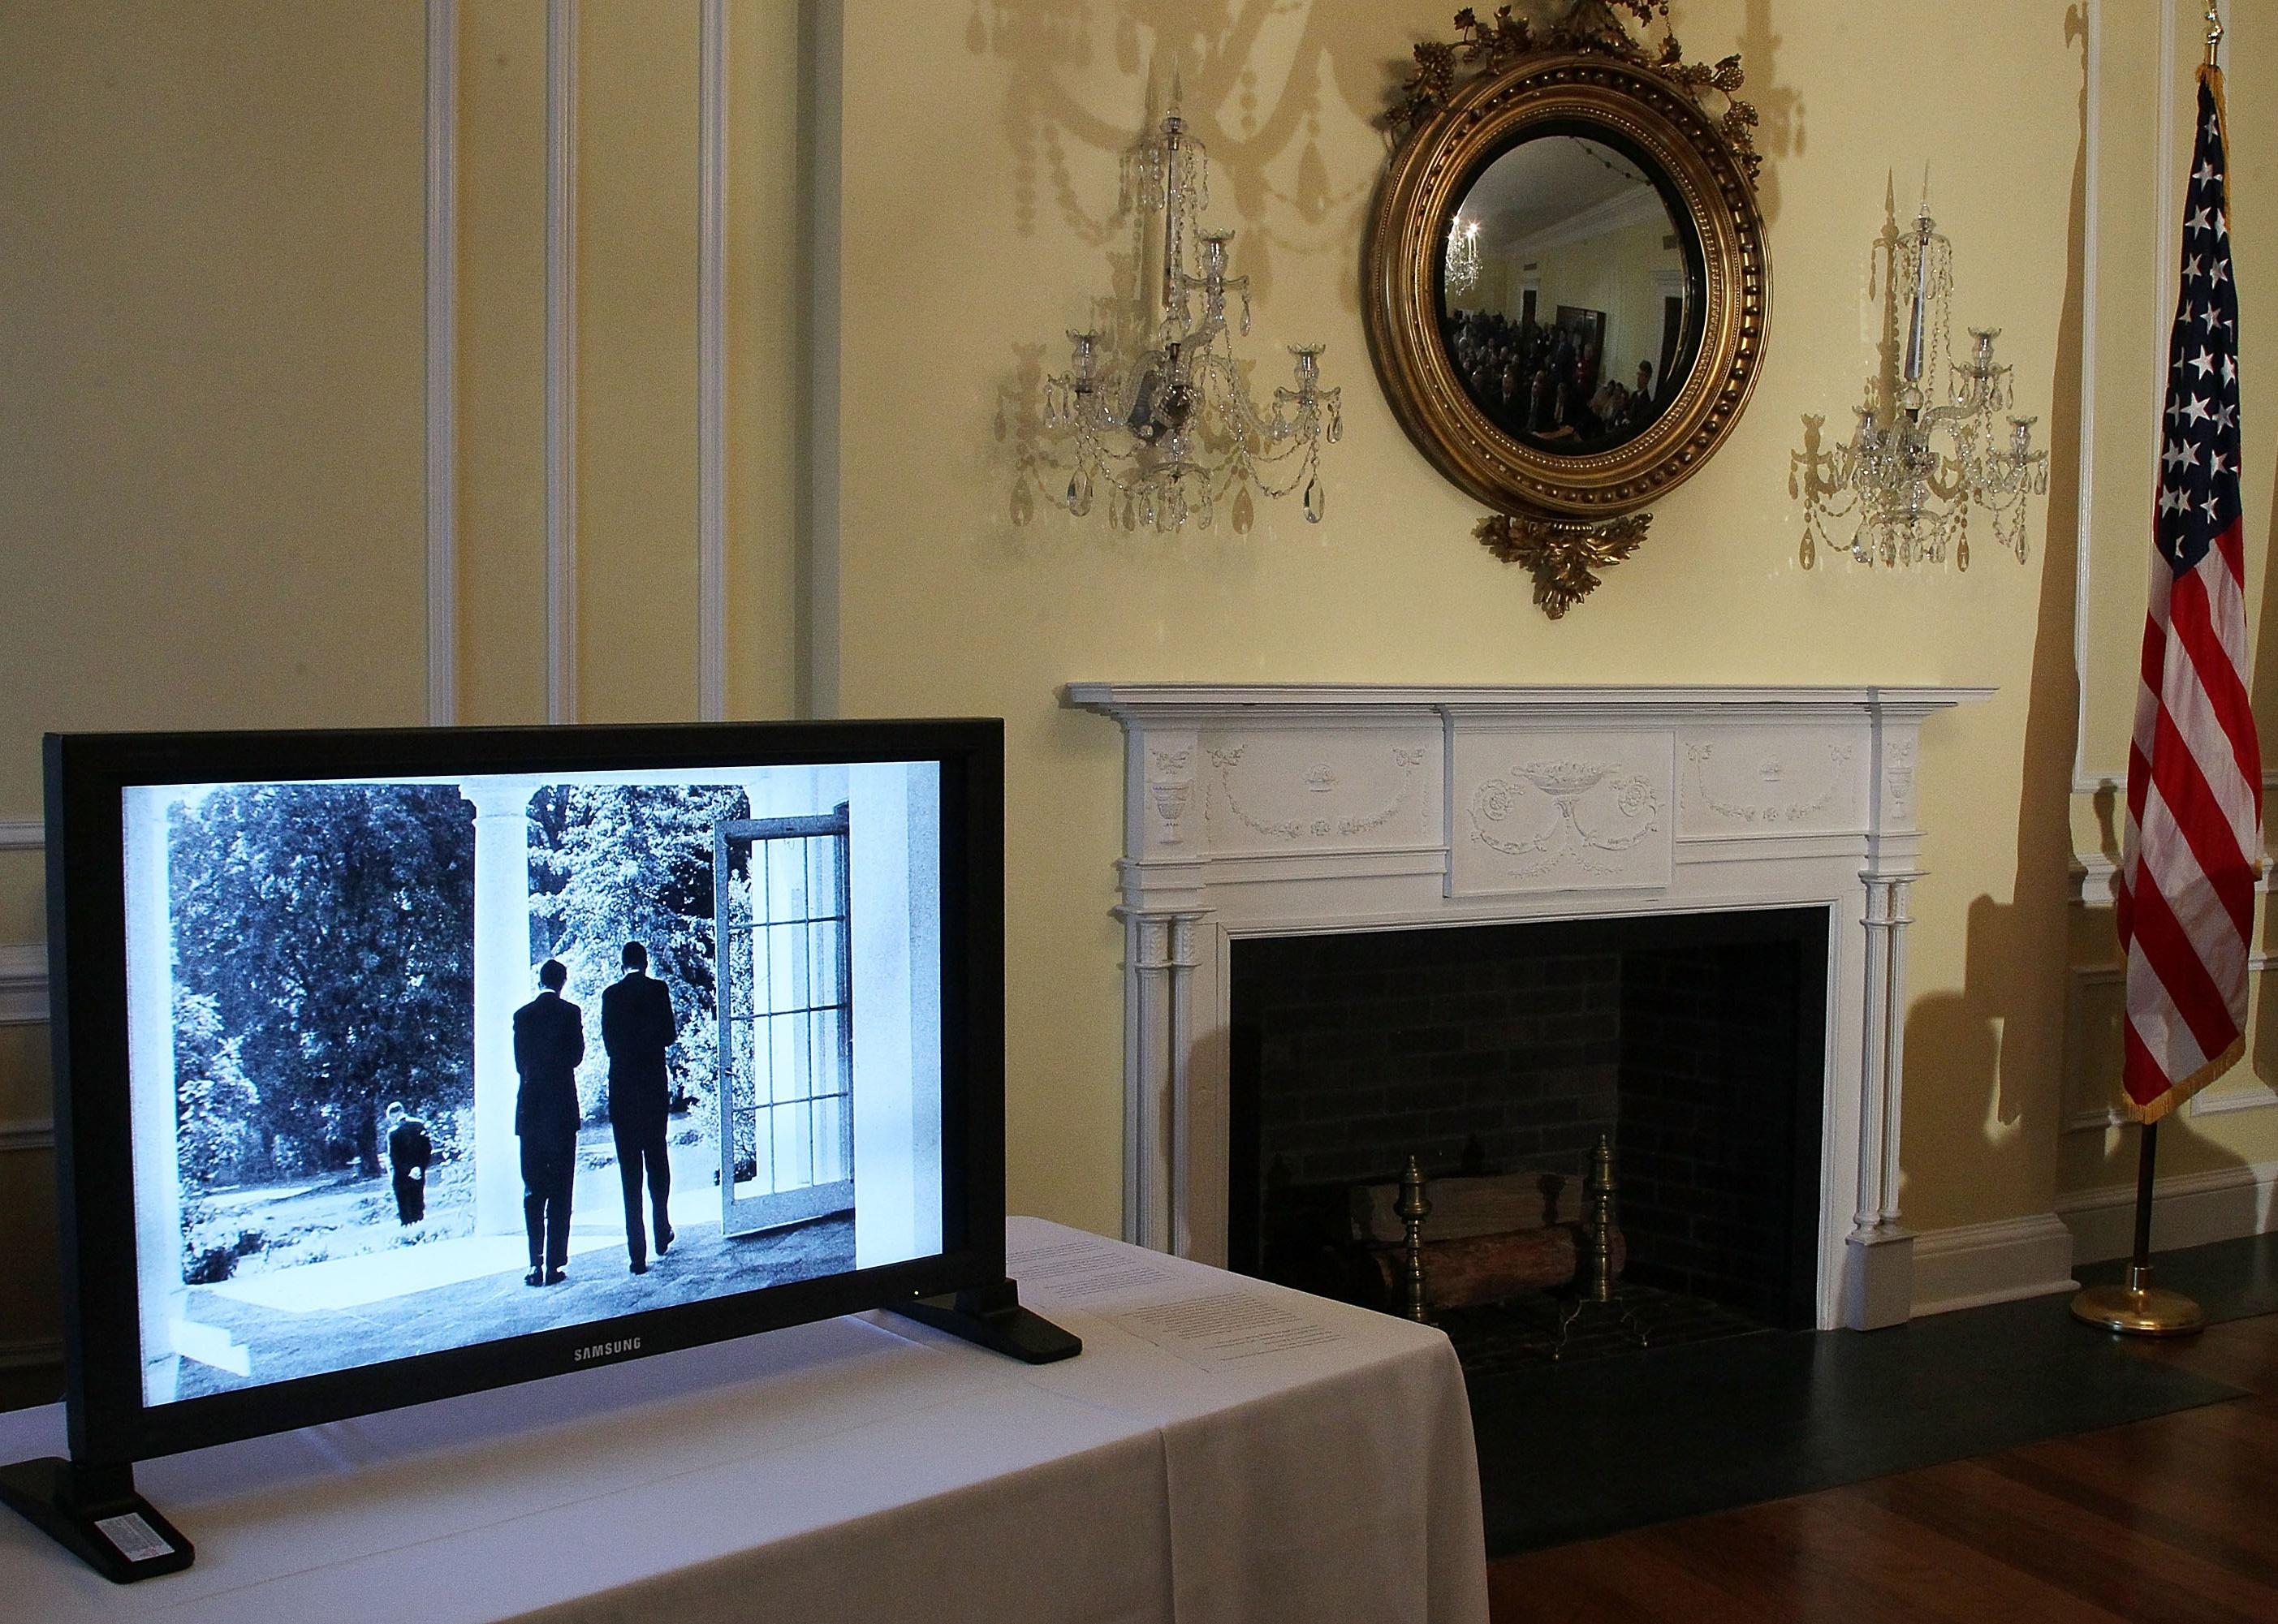 Images from the John F. Kennedy archive website are shown on a monitor 